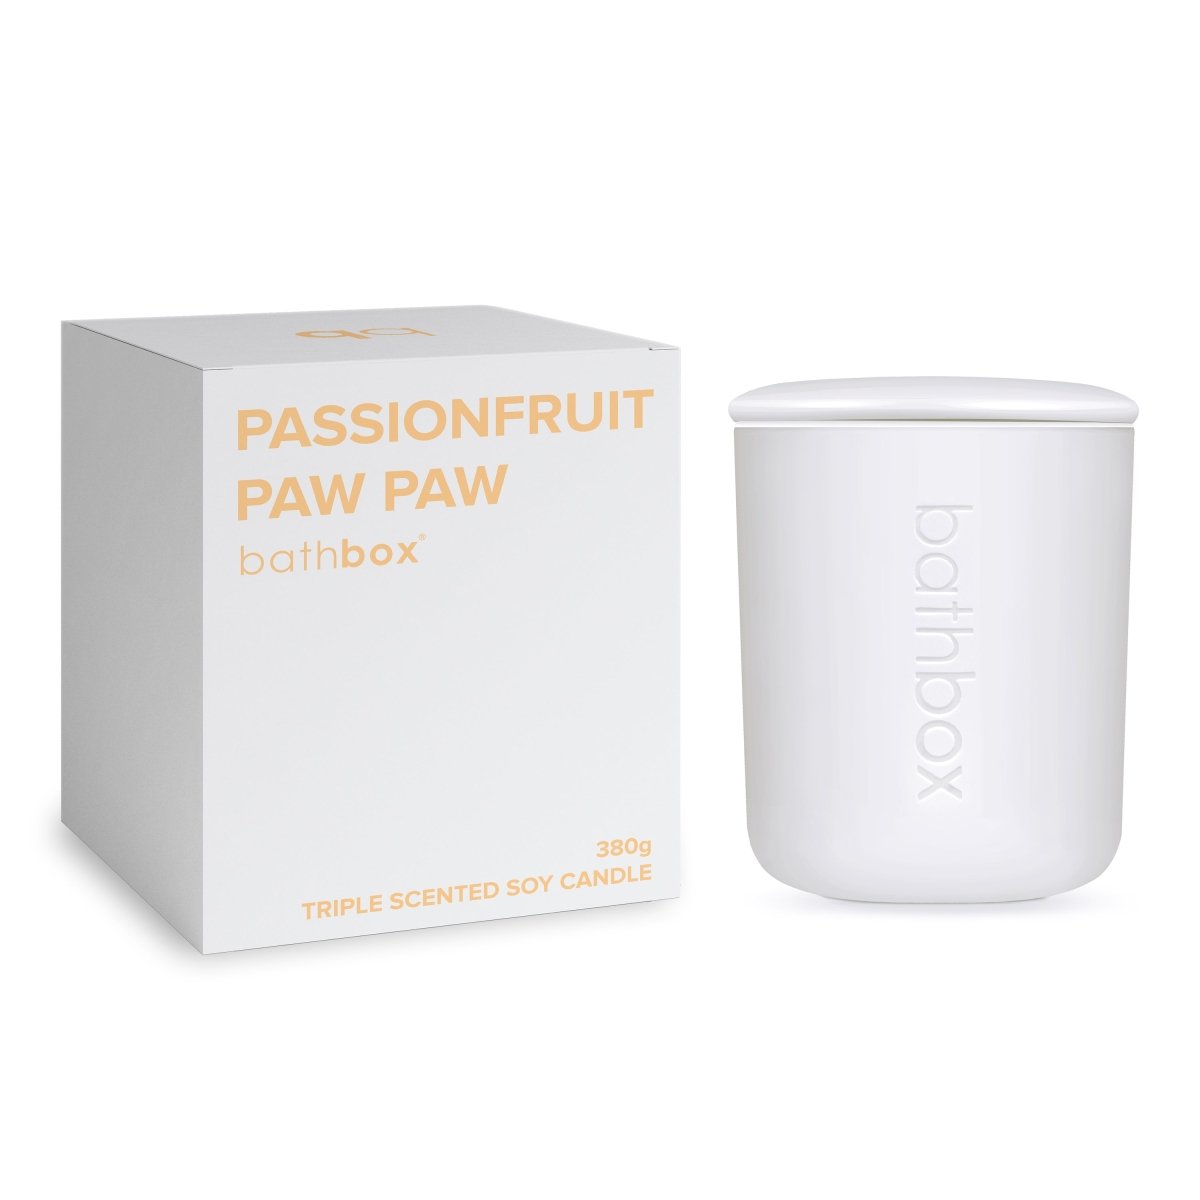 Passionfruit Paw Paw Candle - Natural Soy Wax, Large Triple Scented, Strong Double Wick Candle by Bath Box Australia